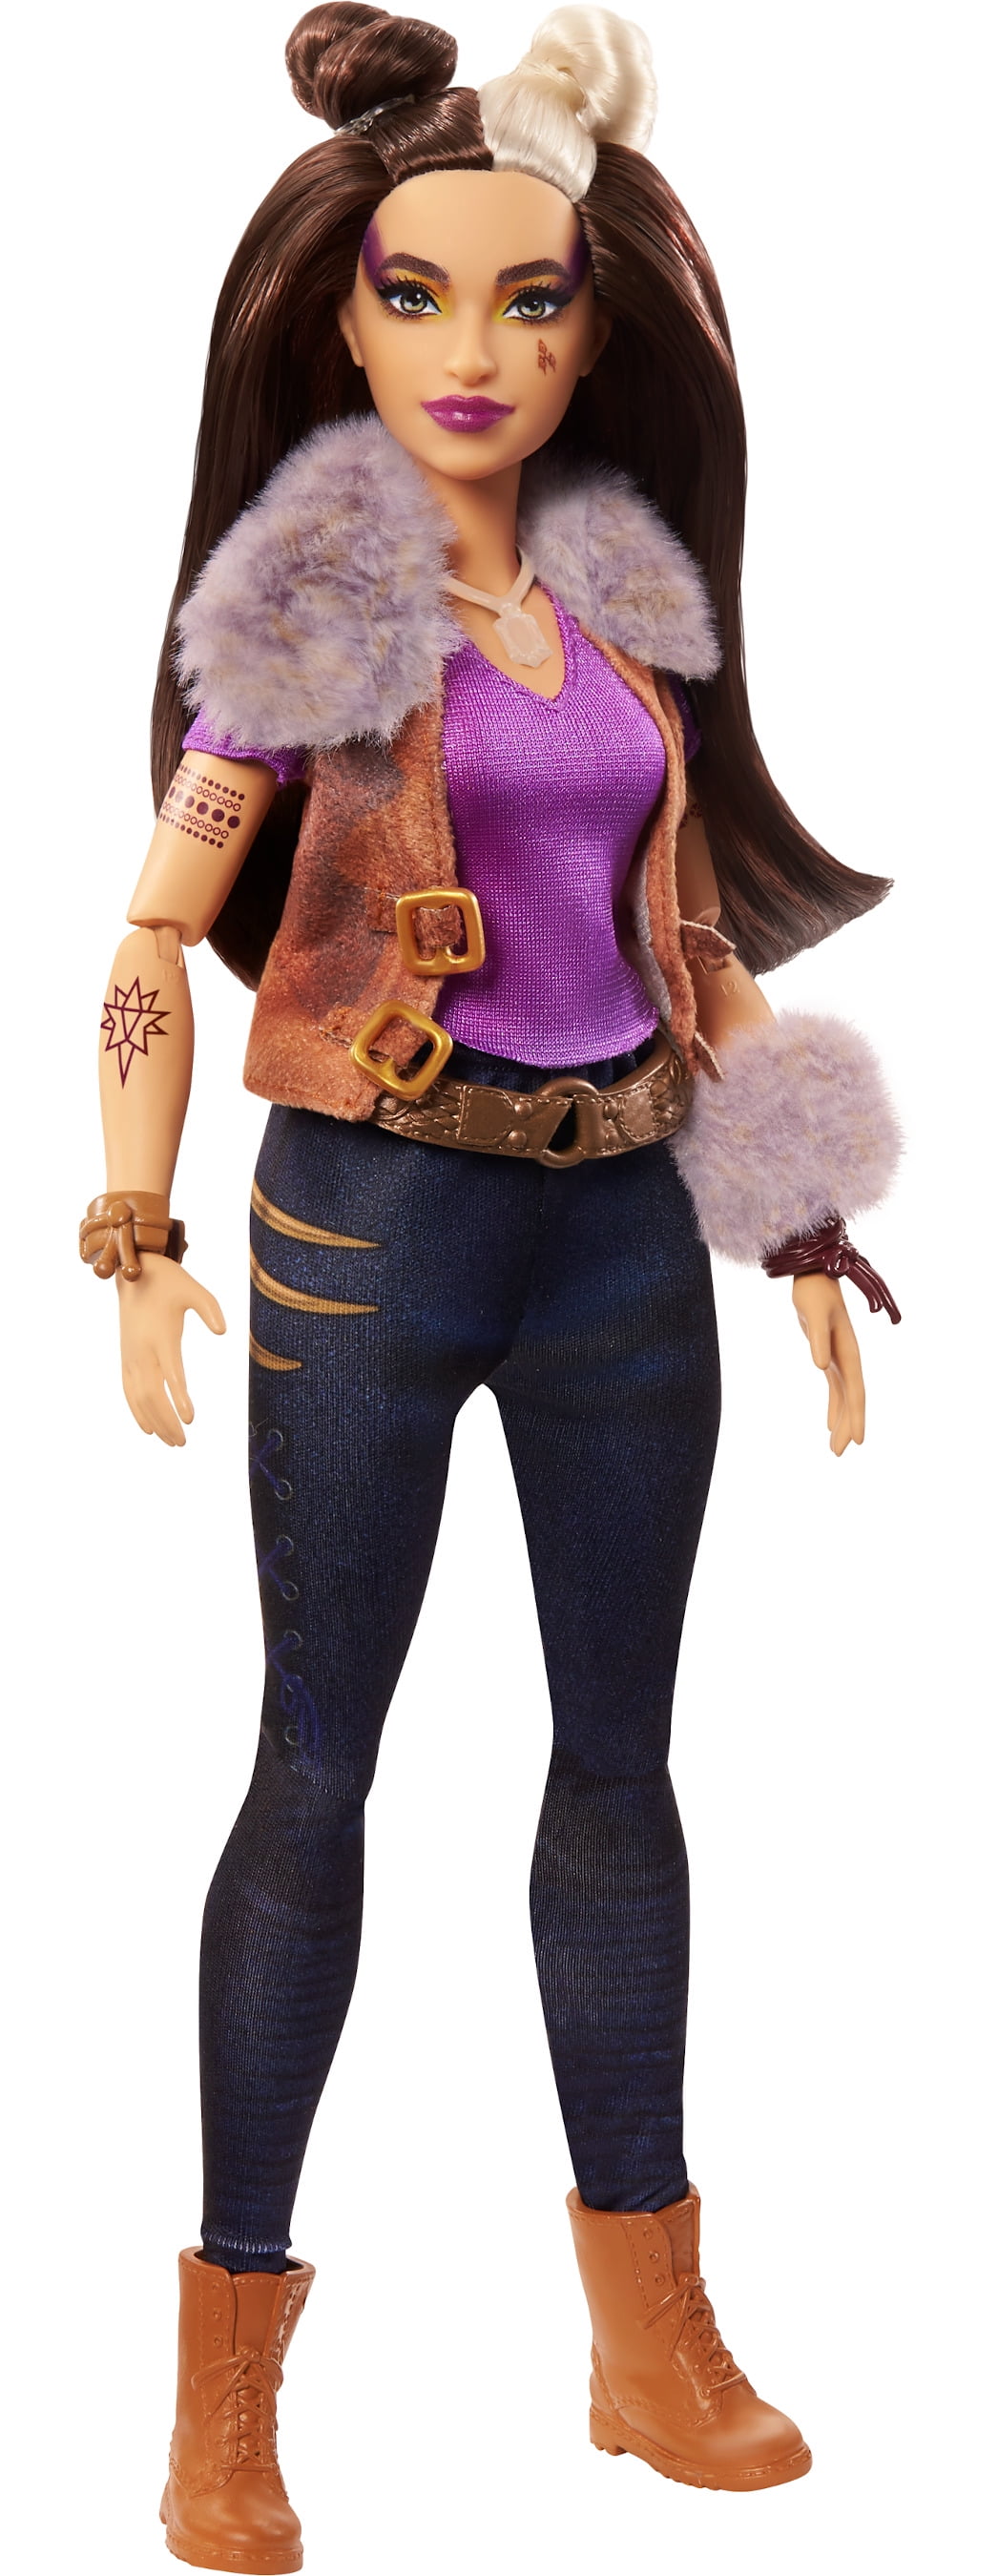 Disney'S Zombies 2, Addison Wells Werewolf Singing Doll (11.5-Inch) With  Hit Song “Call To The Wild” 